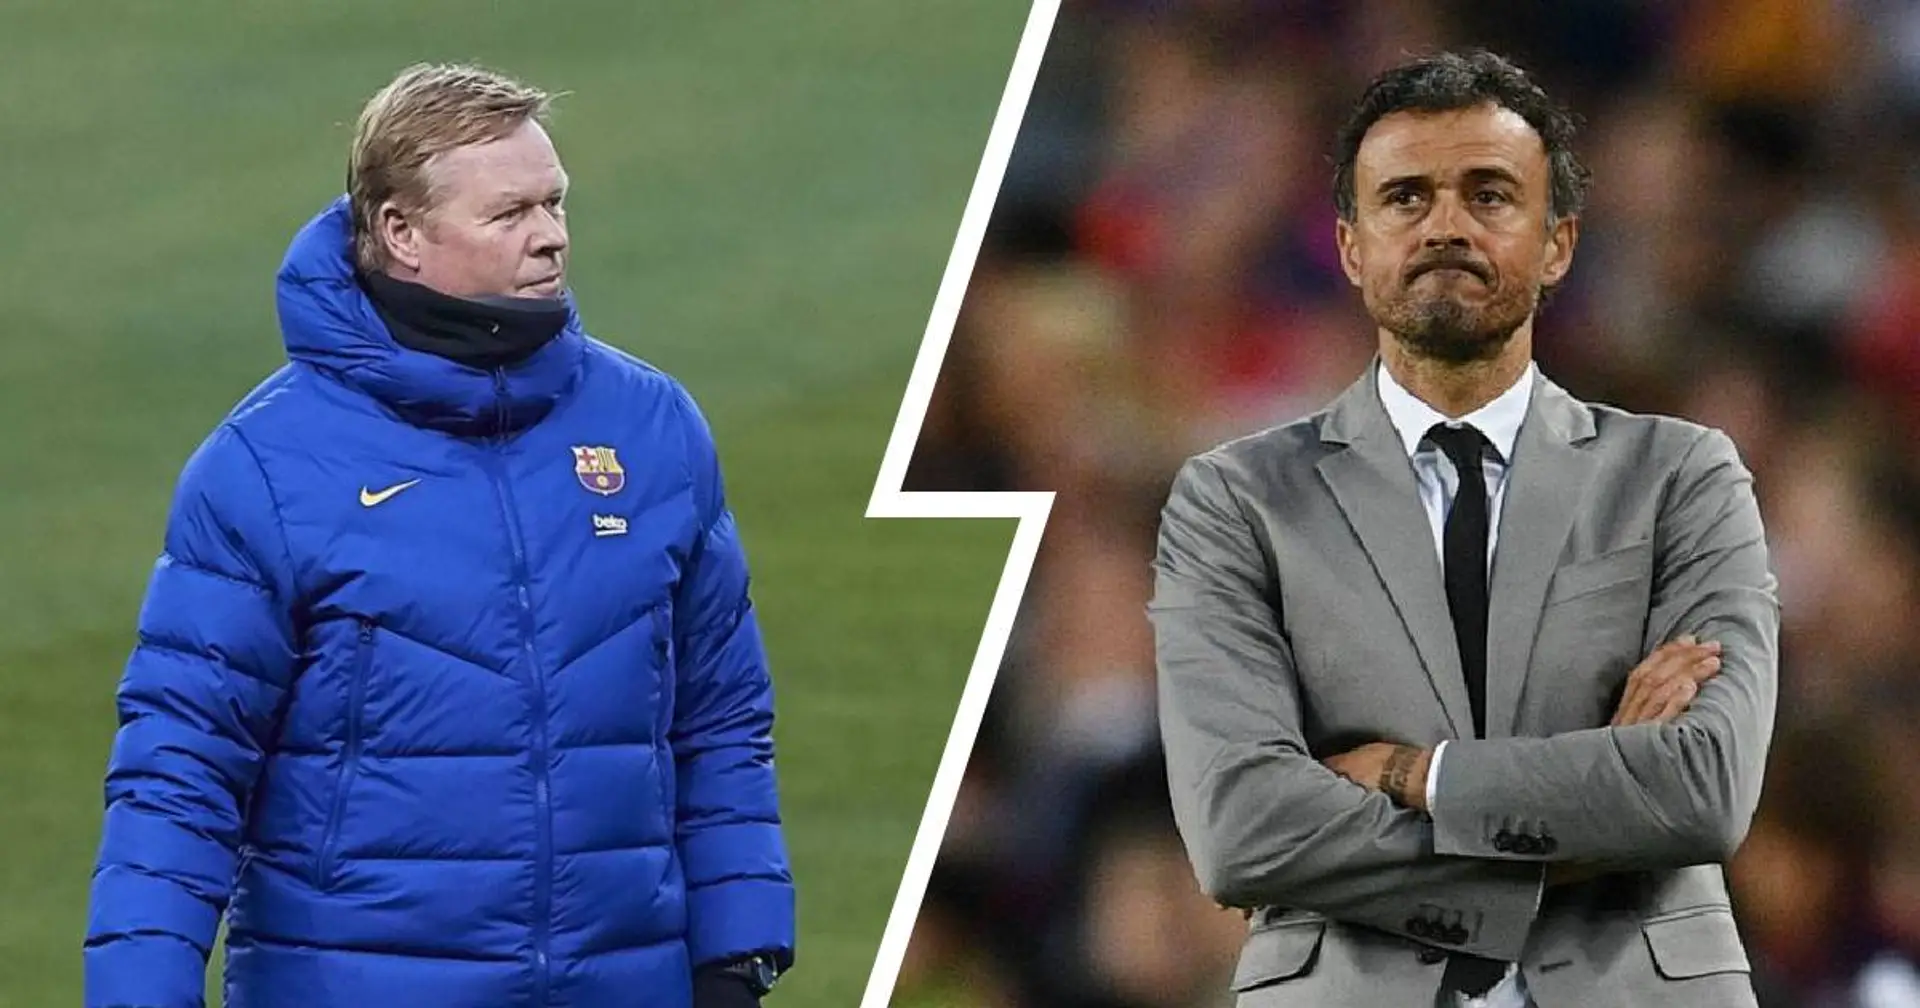 Barcelona need 1 victory to match Luis Enrique's impressive record for consecutive away league wins